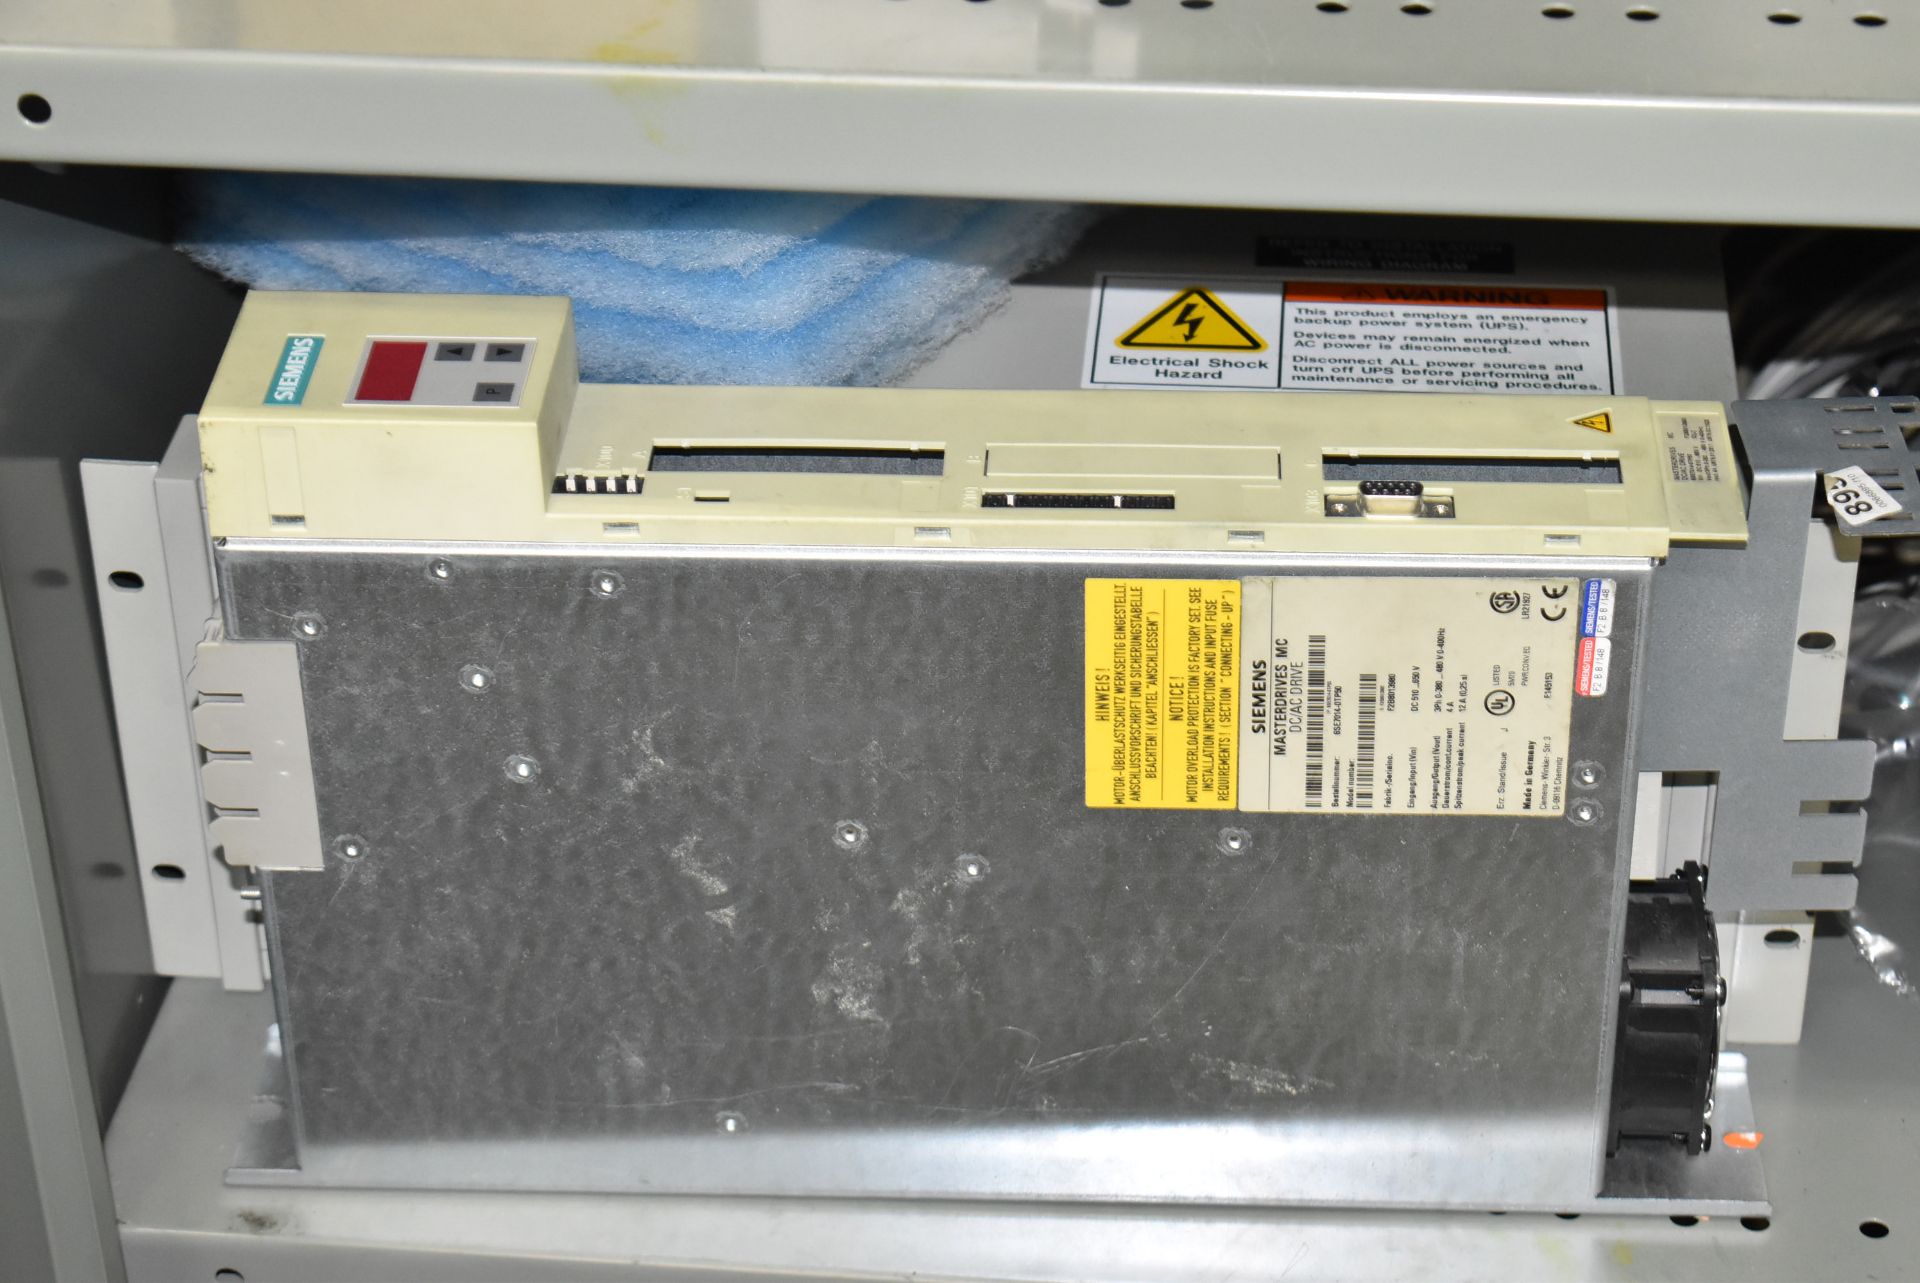 LOT/ HIGHBOY CABINET WITH CONTENTS - INCLUDING SIEMENS COMPONENTS, CONTROL MODULES, ELECTRIC - Image 7 of 8